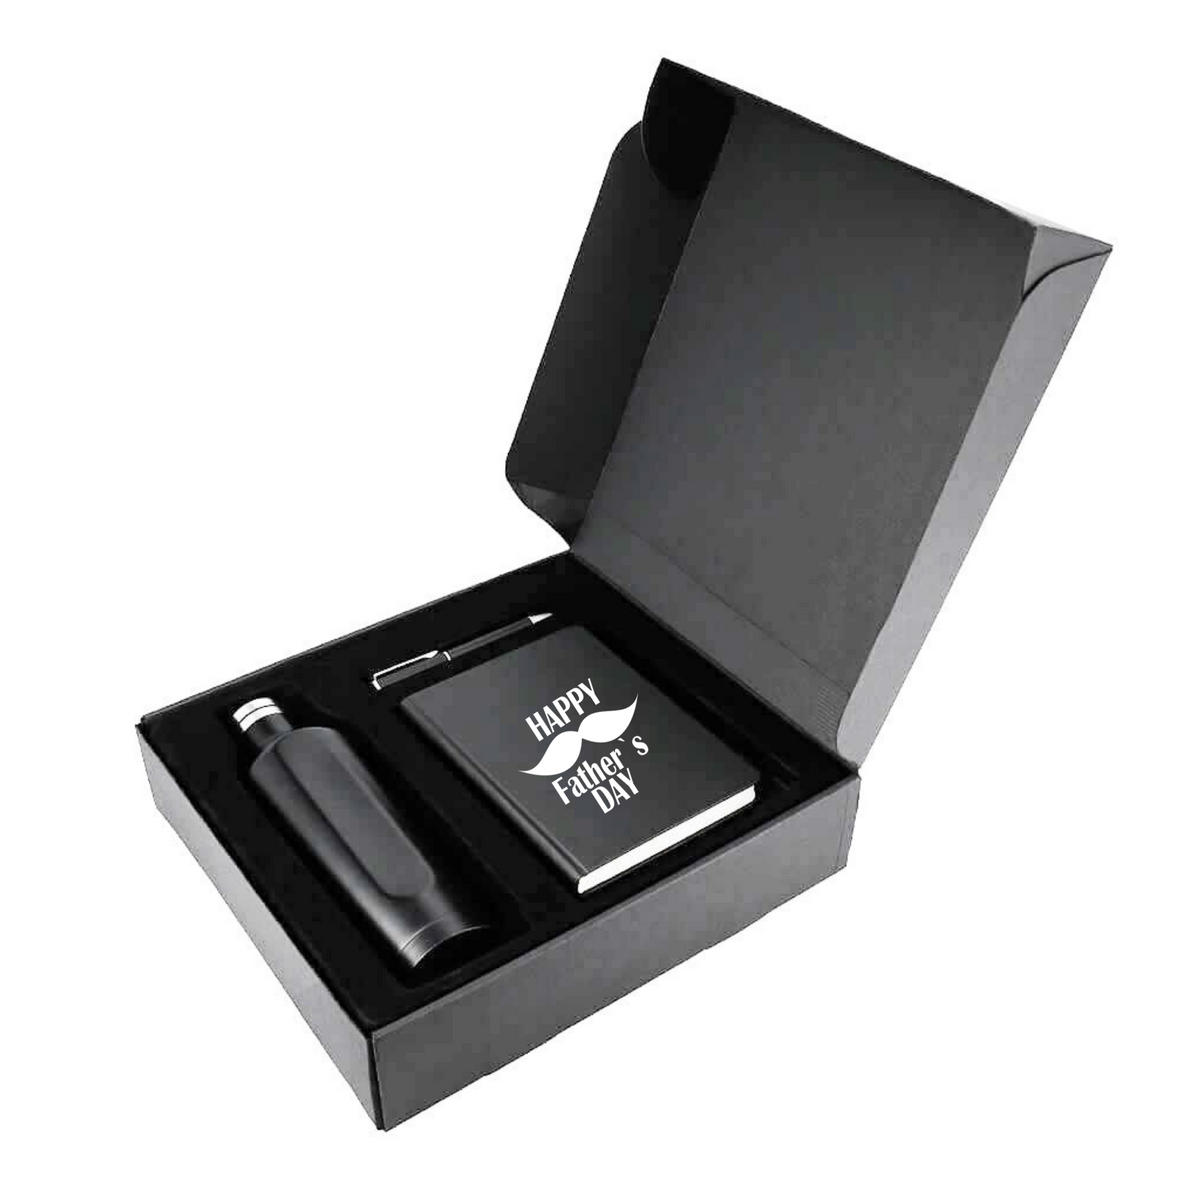 ARGAKI - SAN THOME Gift Set- SS Bottle, Notebook, and Pen